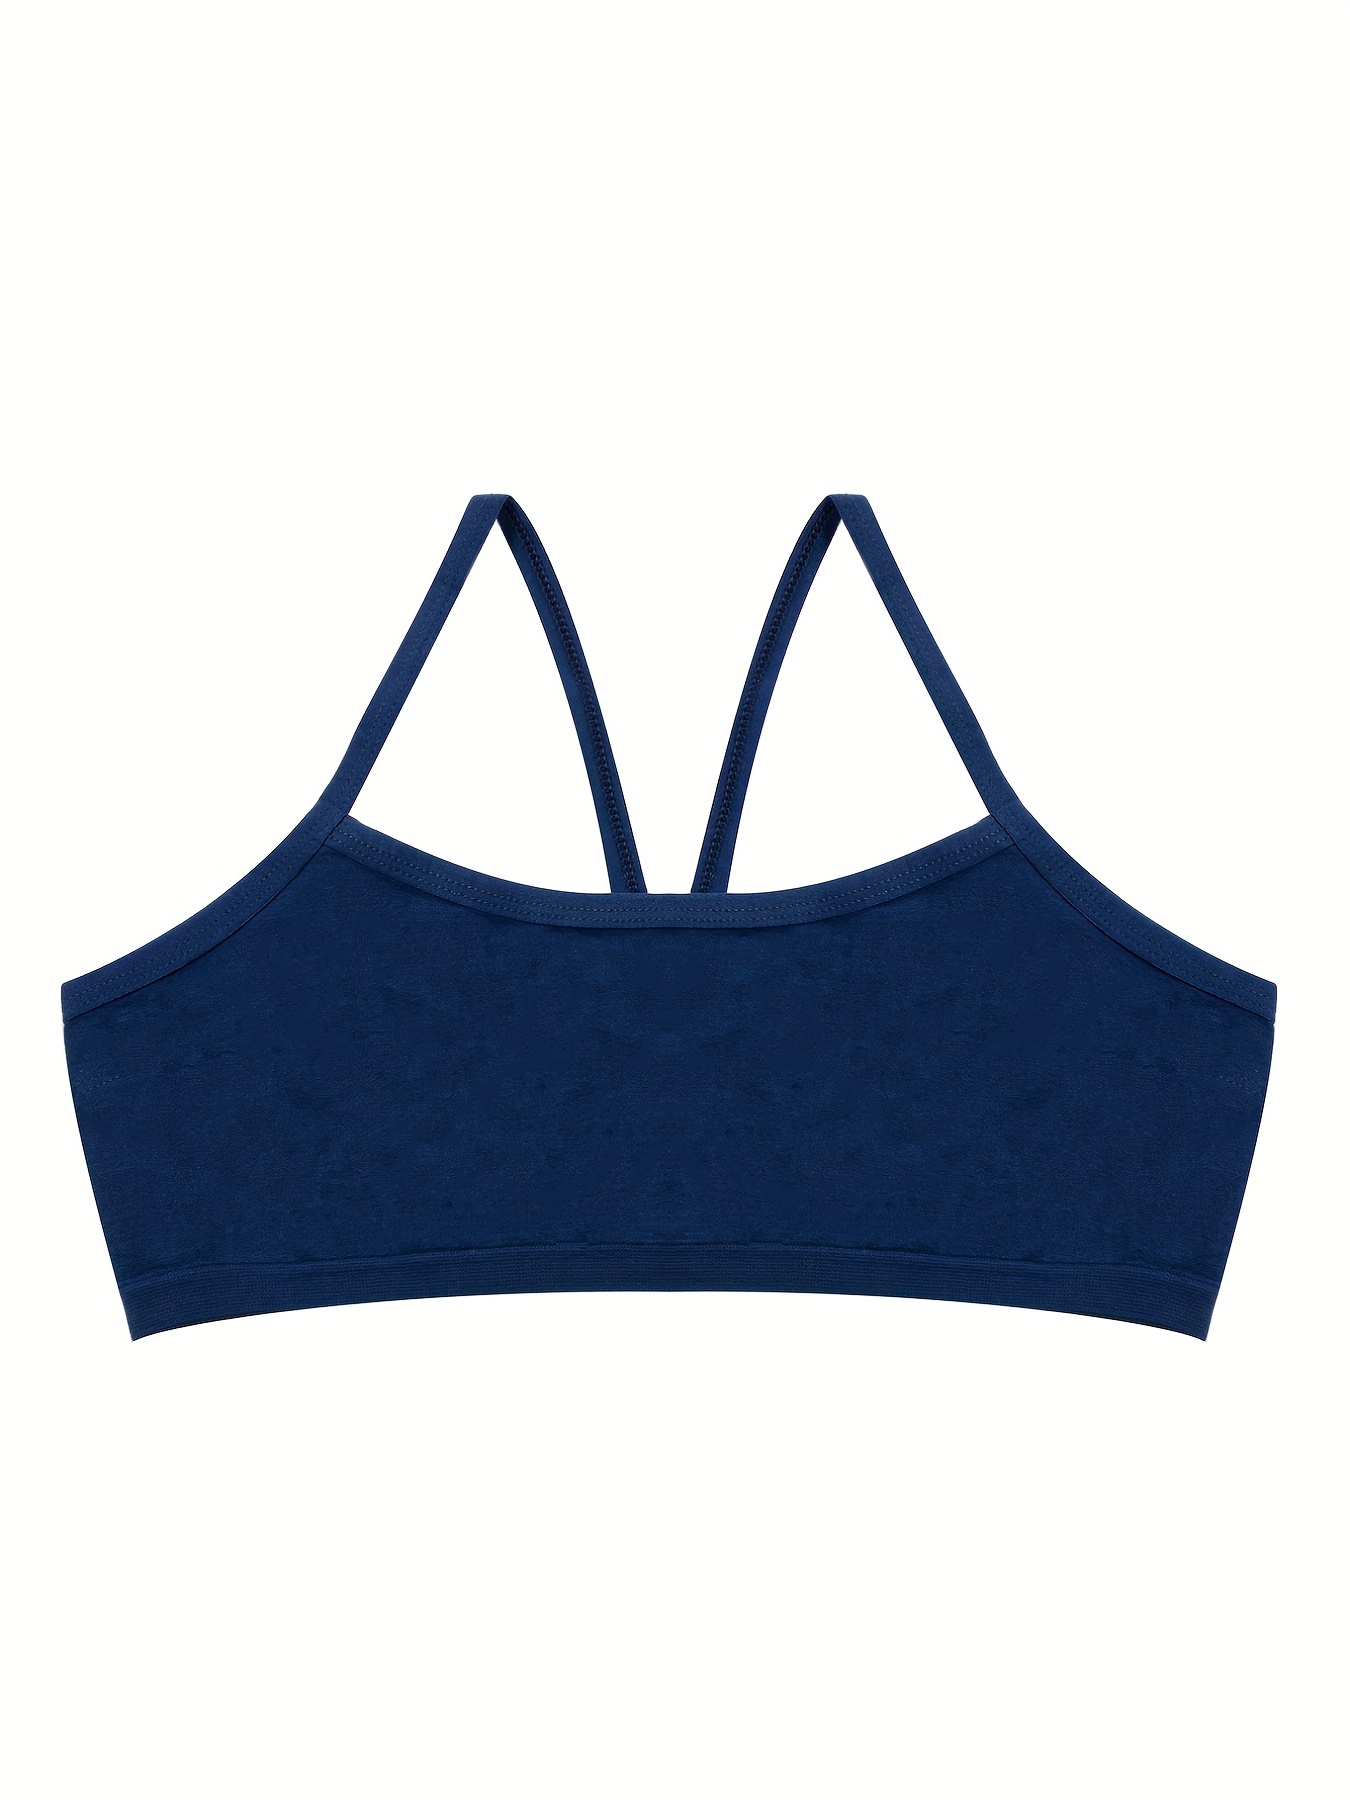 Girls Stretch Sports Bras Comfortable Soft Bralette Underwear For Student  Teens 6-13 Years Old